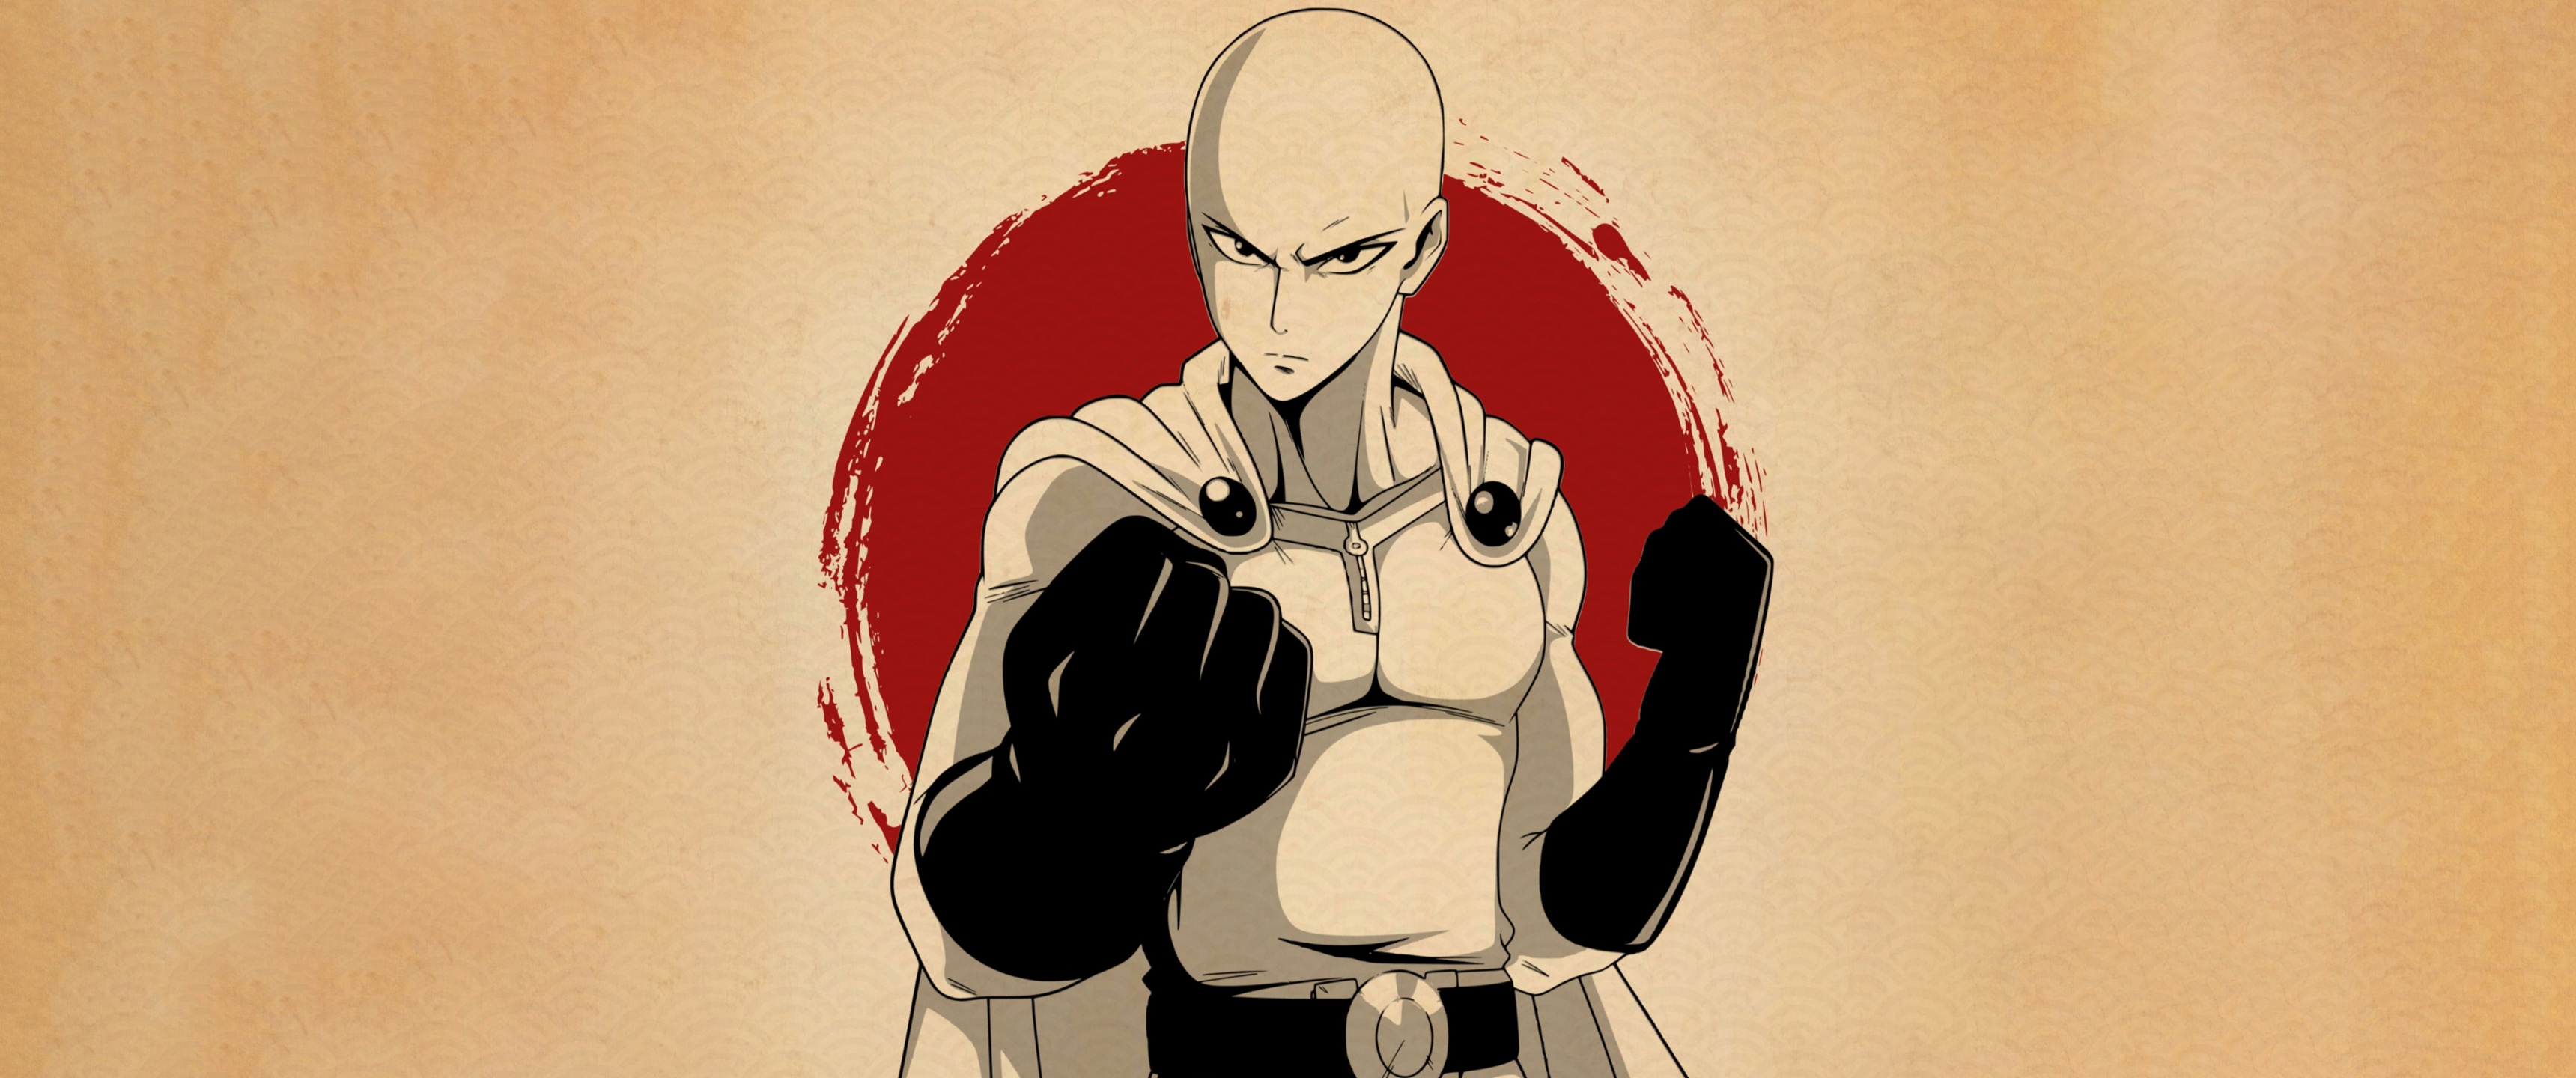 Share 73+ one punch man wallpapers super hot - in.cdgdbentre